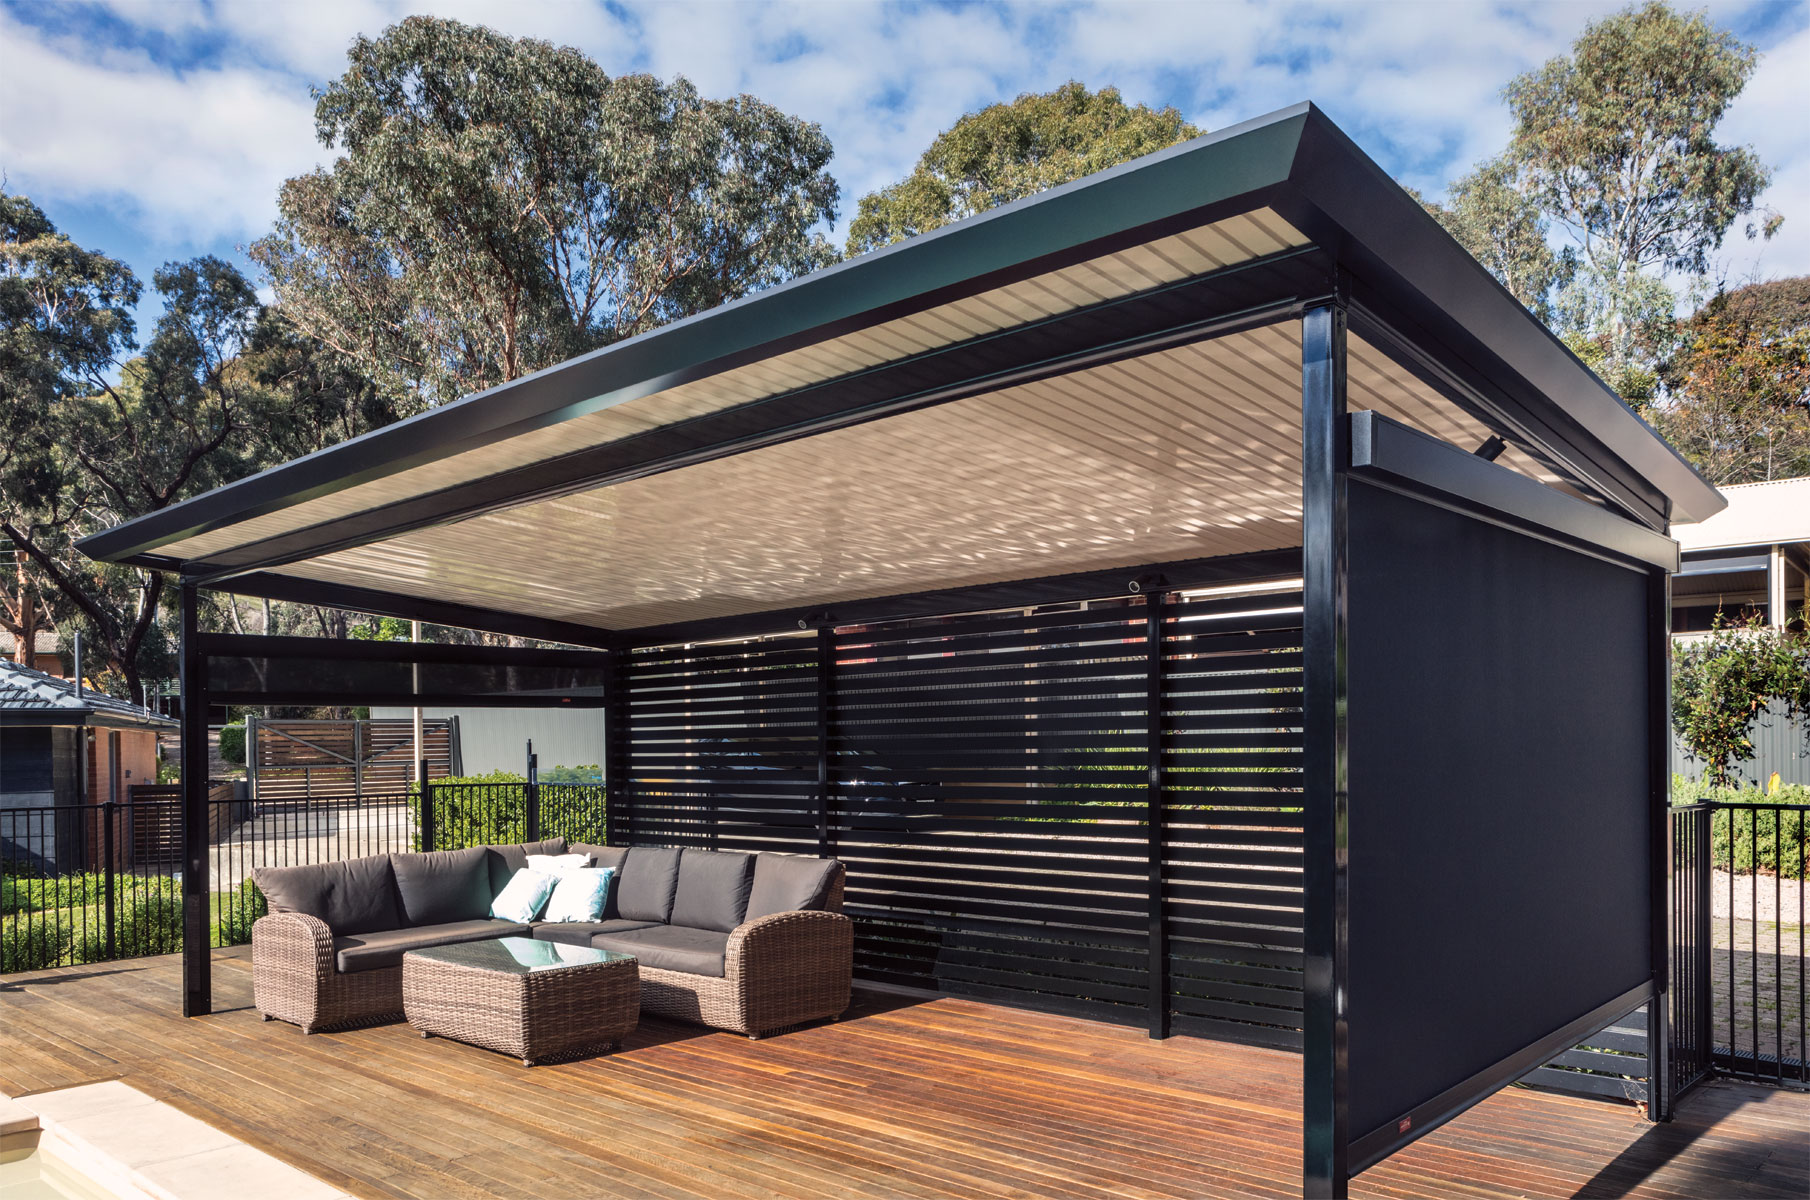 kilsyth, pergola, contact, outdoor, impressions, required, your, call, listen, ability, best, listen, means, need, information, further, Outback Flat Roof Verandah